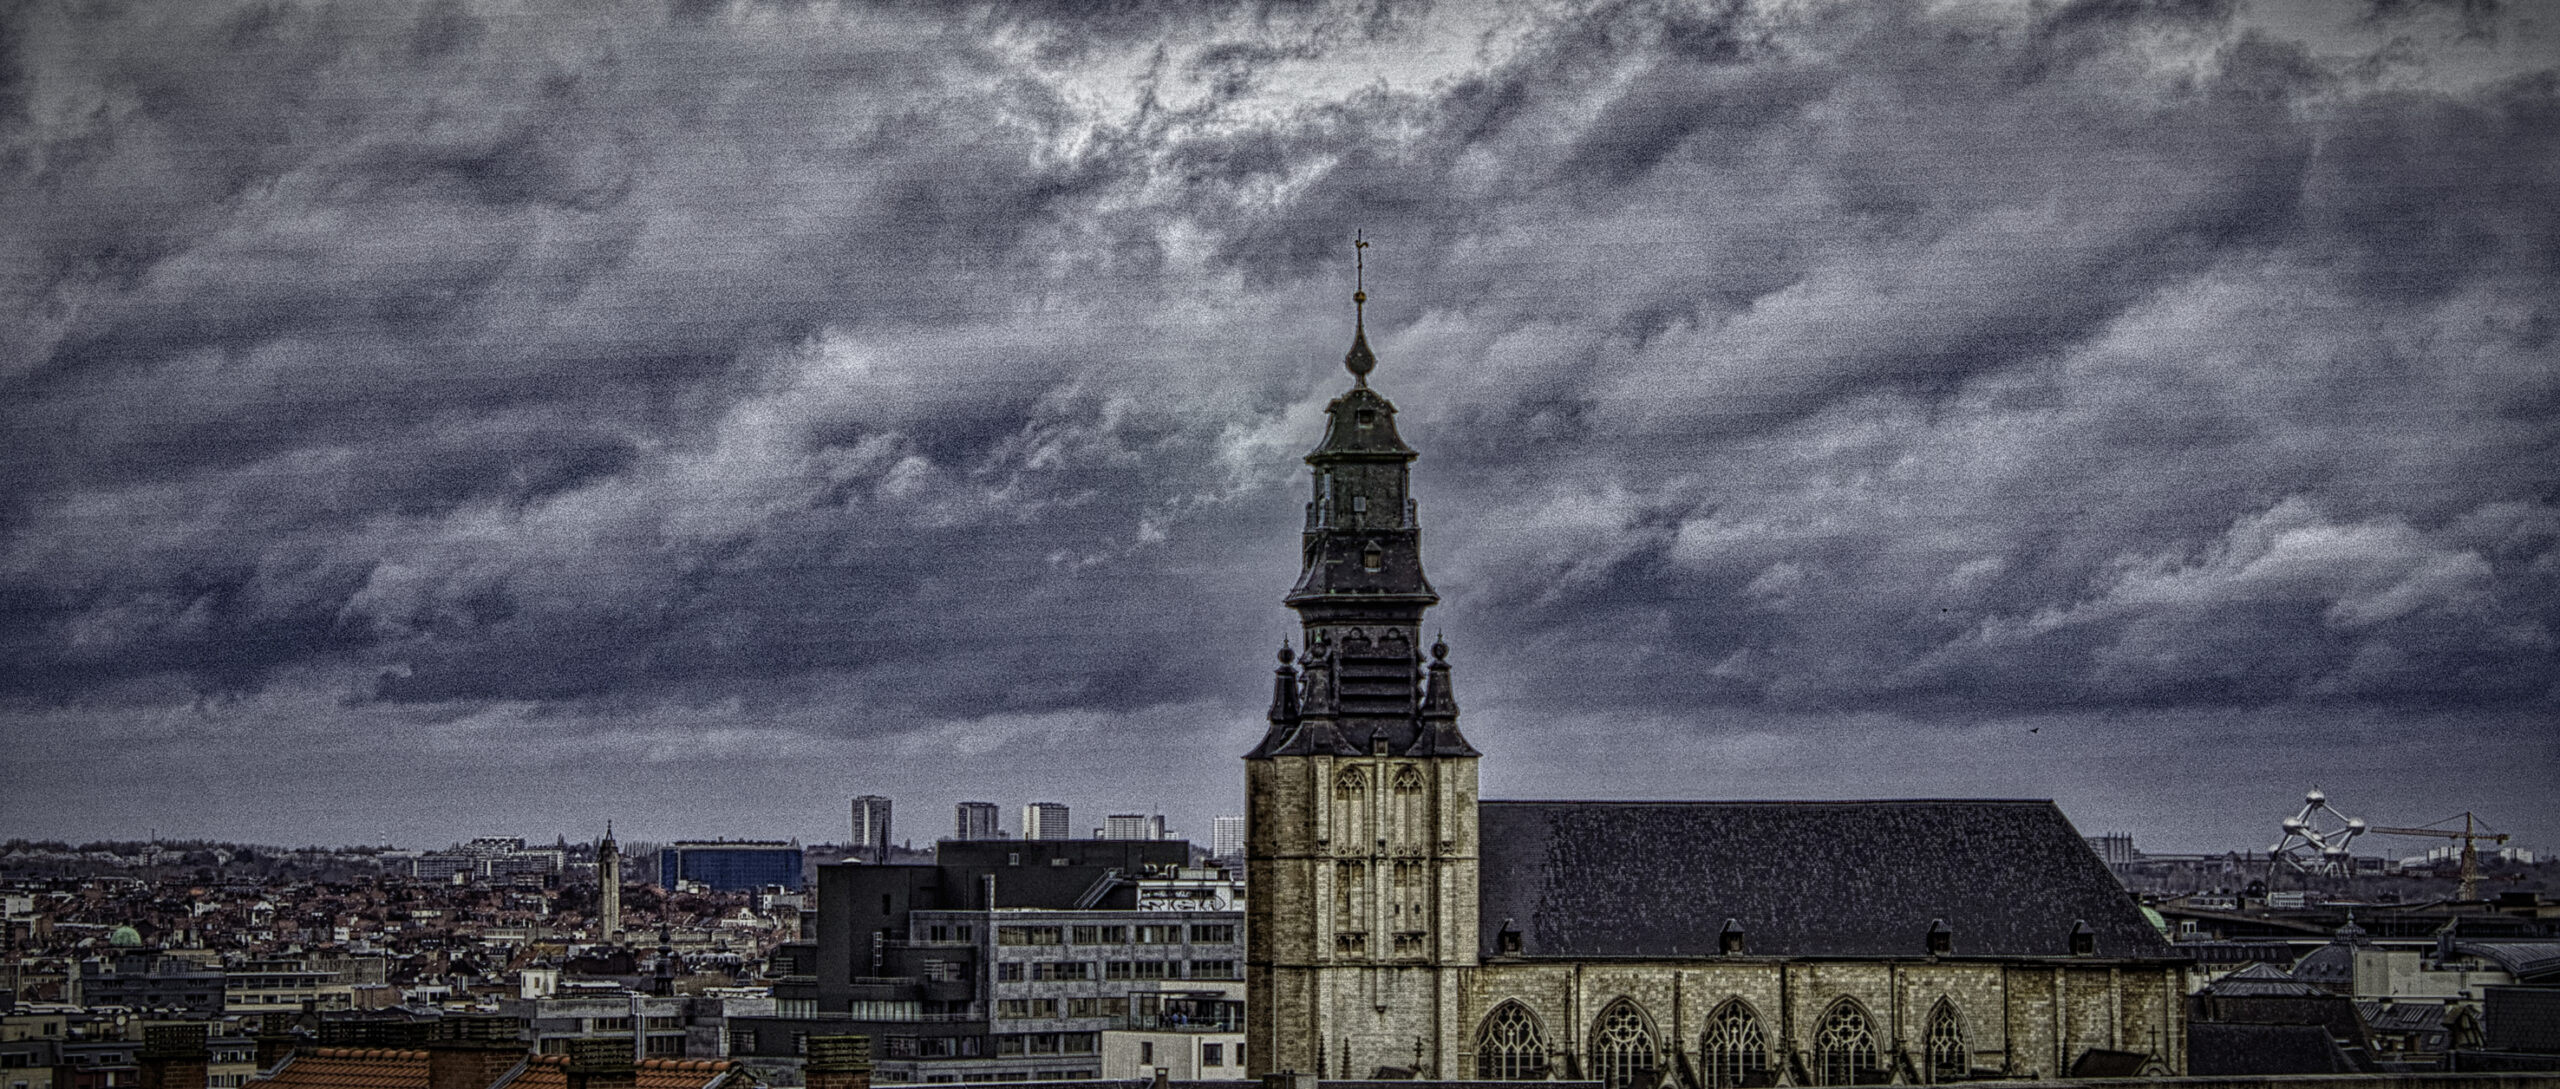 Looking out over Brussels, Belgium on a cloudy day.